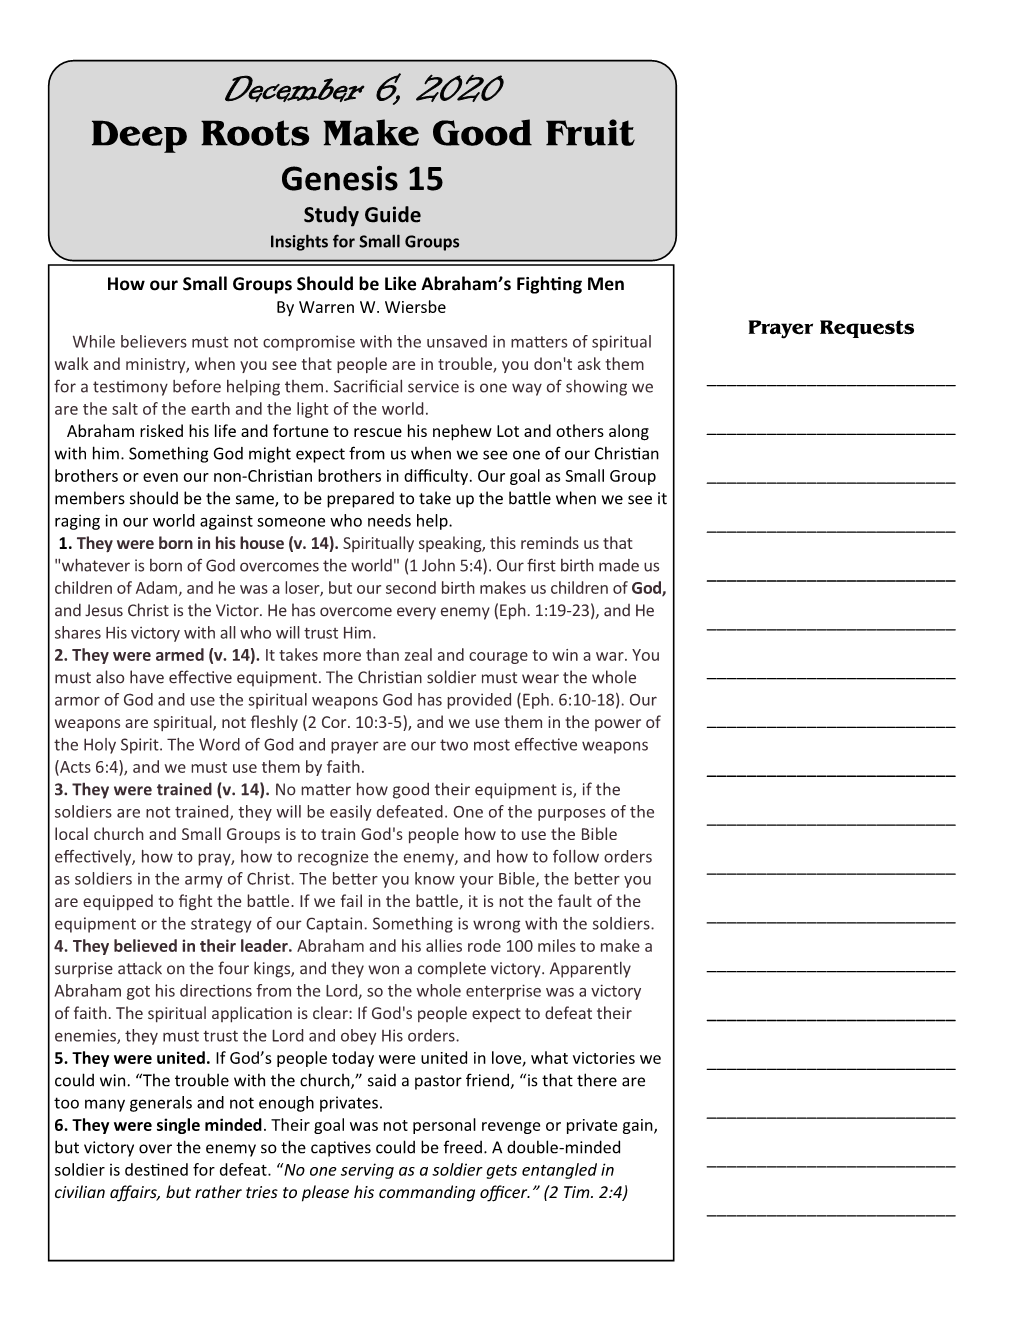 Genesis 15 Study Guide Insights for Small Groups